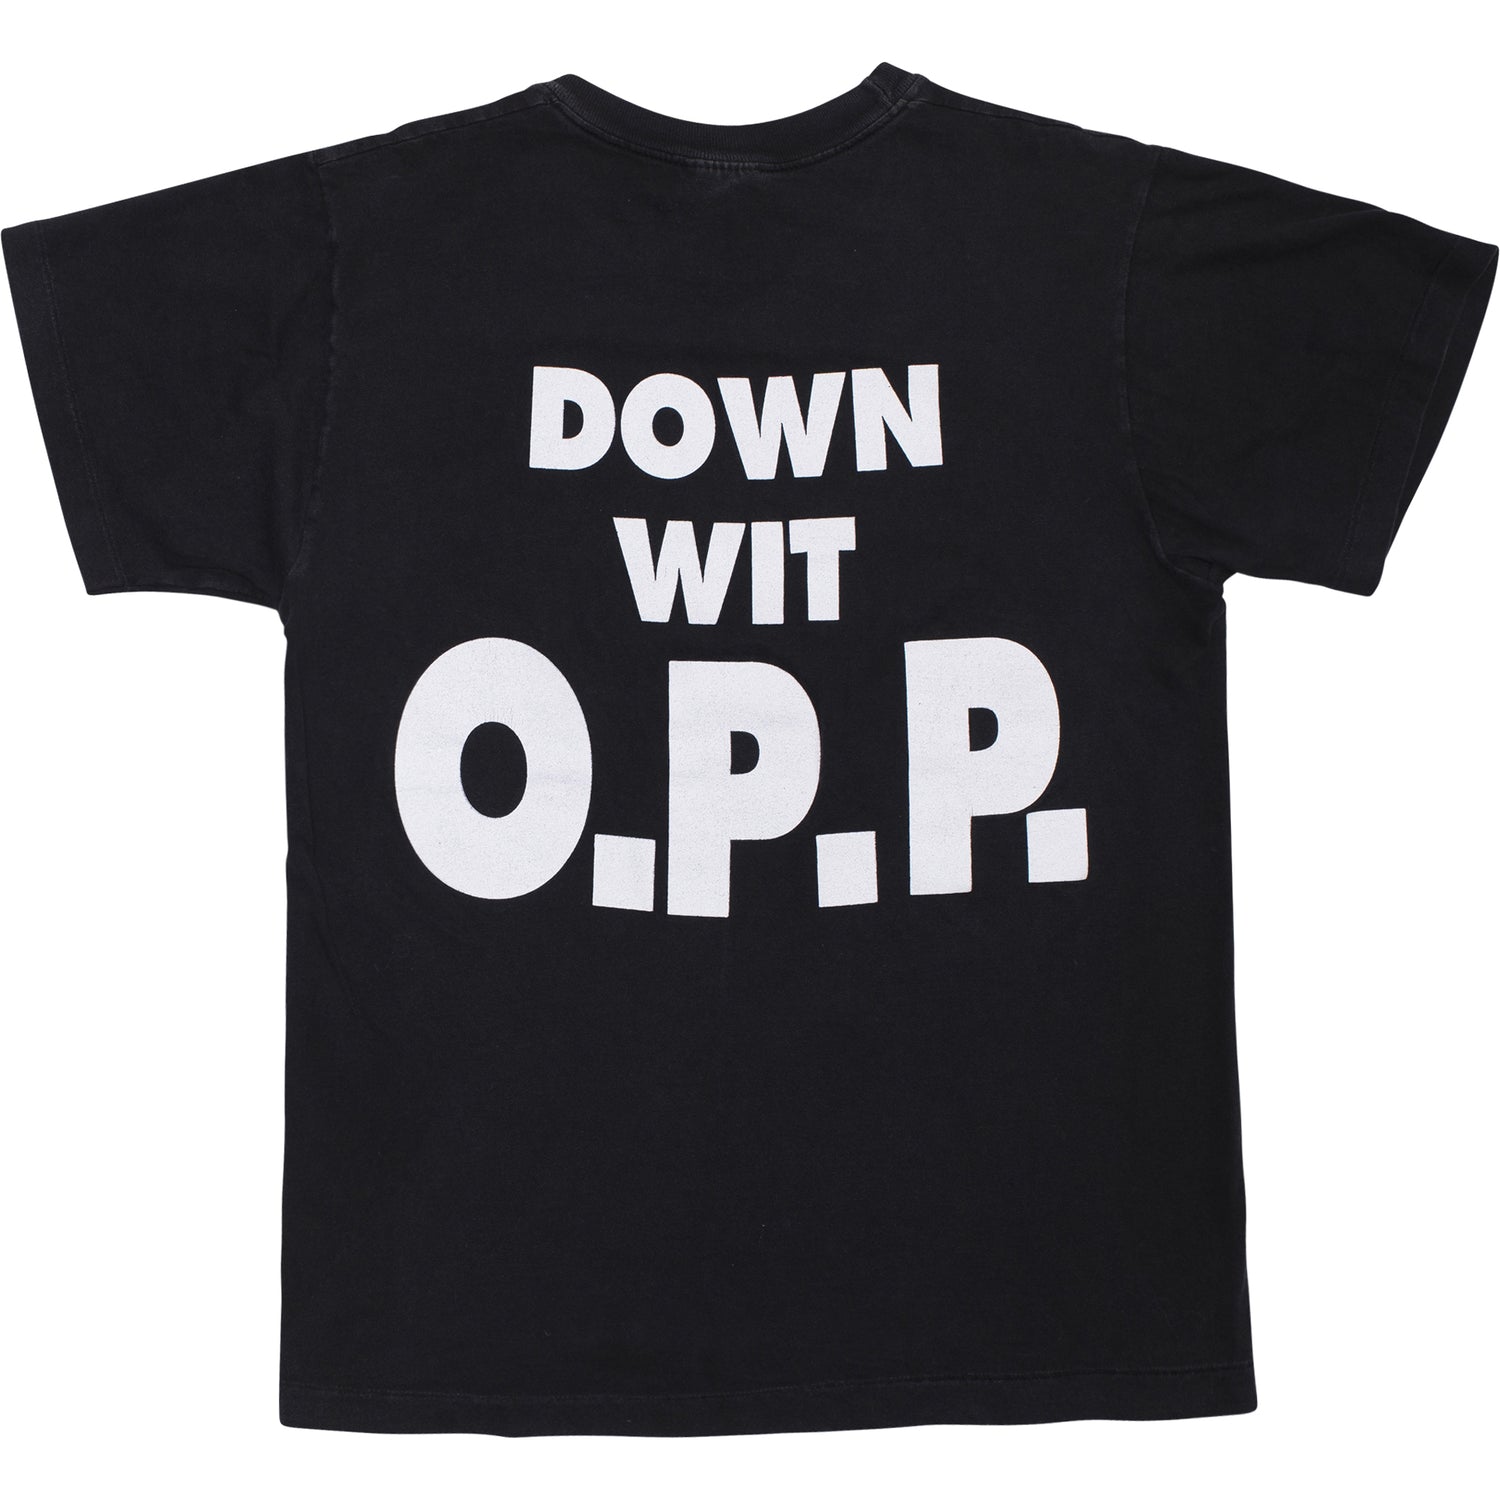 VINTAGE NAUGHTY BY NATURE O.P.P. TEE